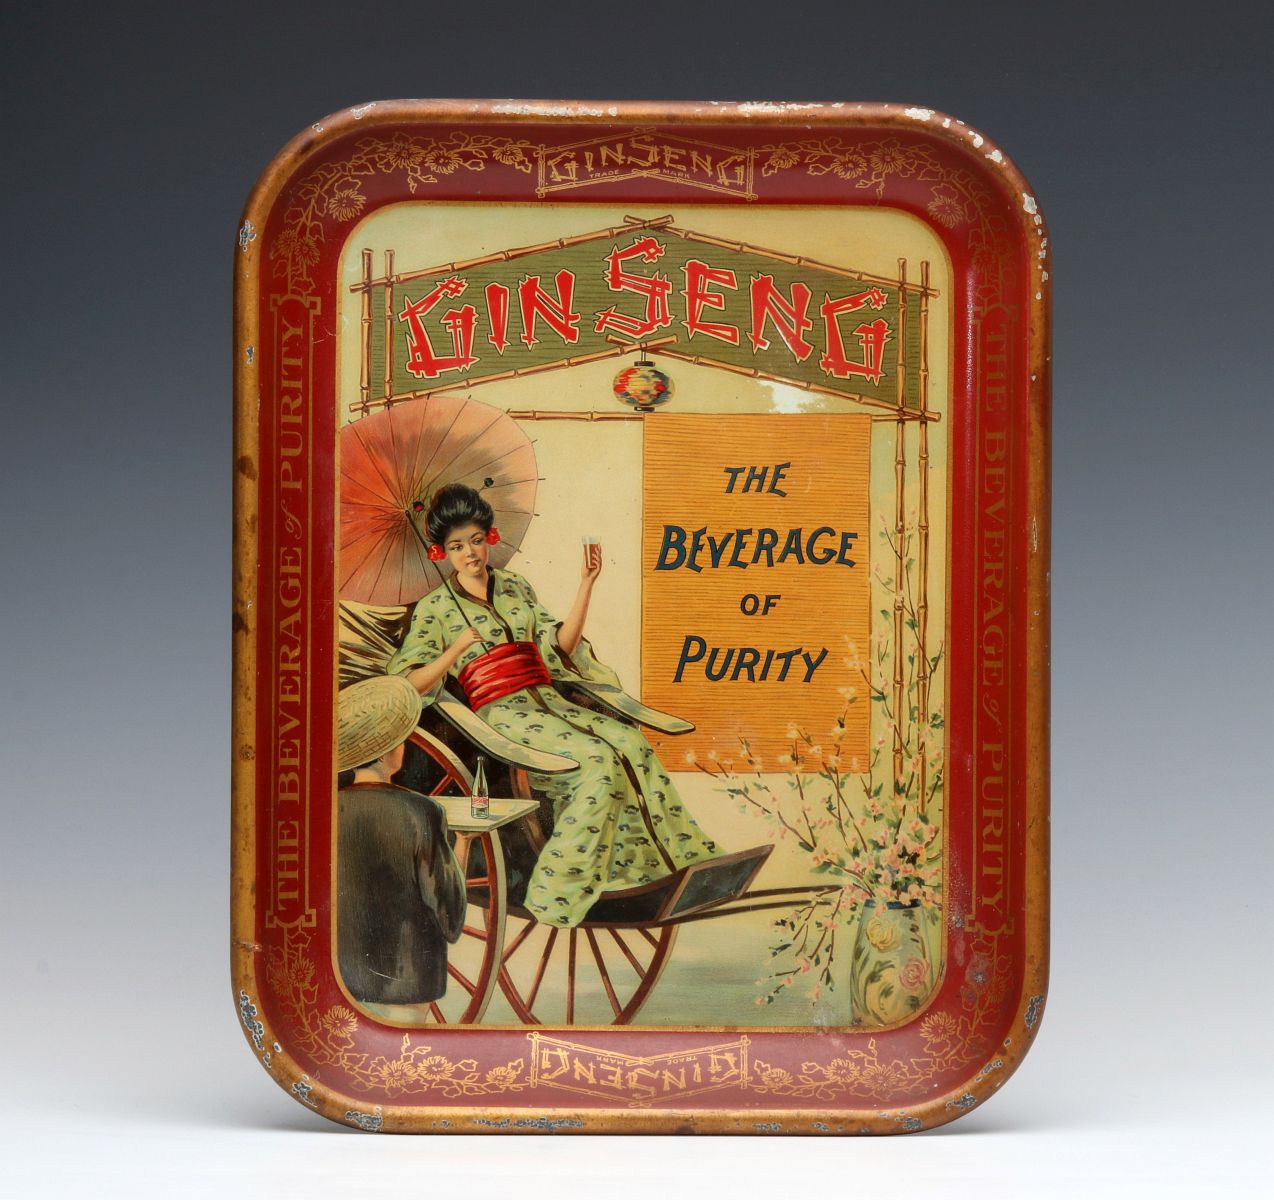 AN ADVERTISING TRAY FOR GINSENG SODA